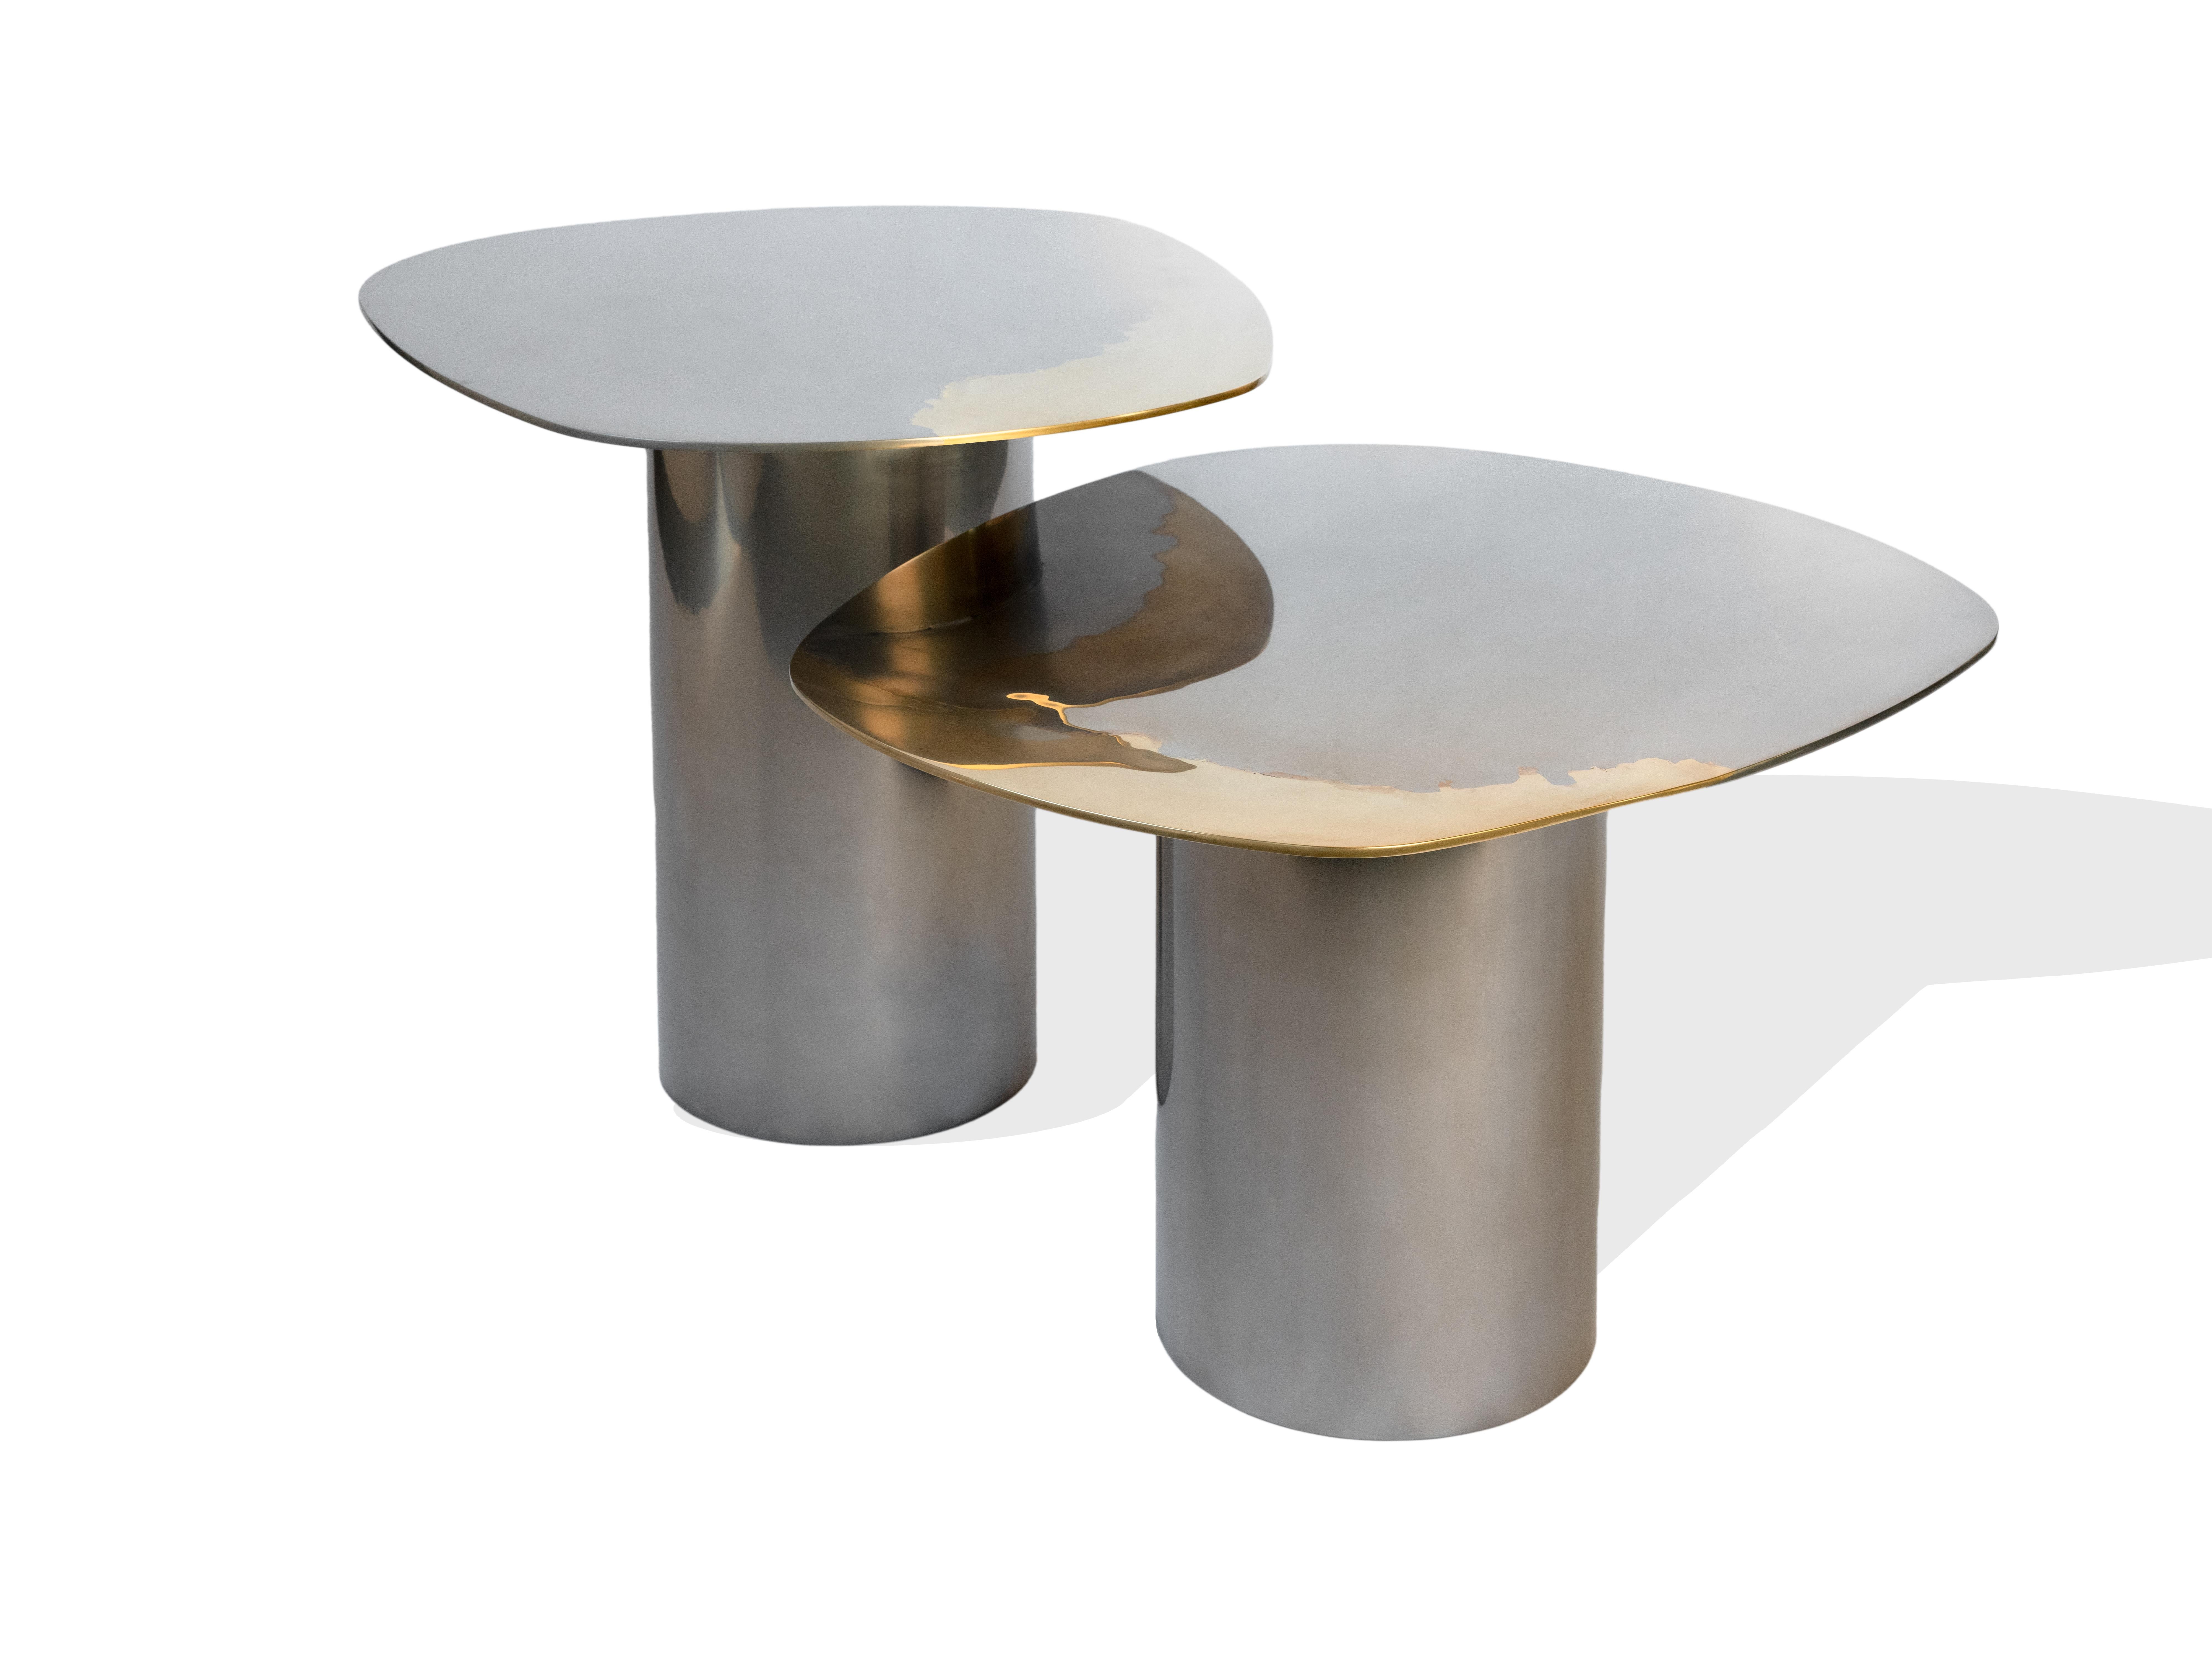 A custom set of 3 nesting tables as part of the Transition collection, featuring unique, artistic mirror polished tabletops, crafted from brass and stainless steel on tubular bases. 

Product sizes:
2 x 30